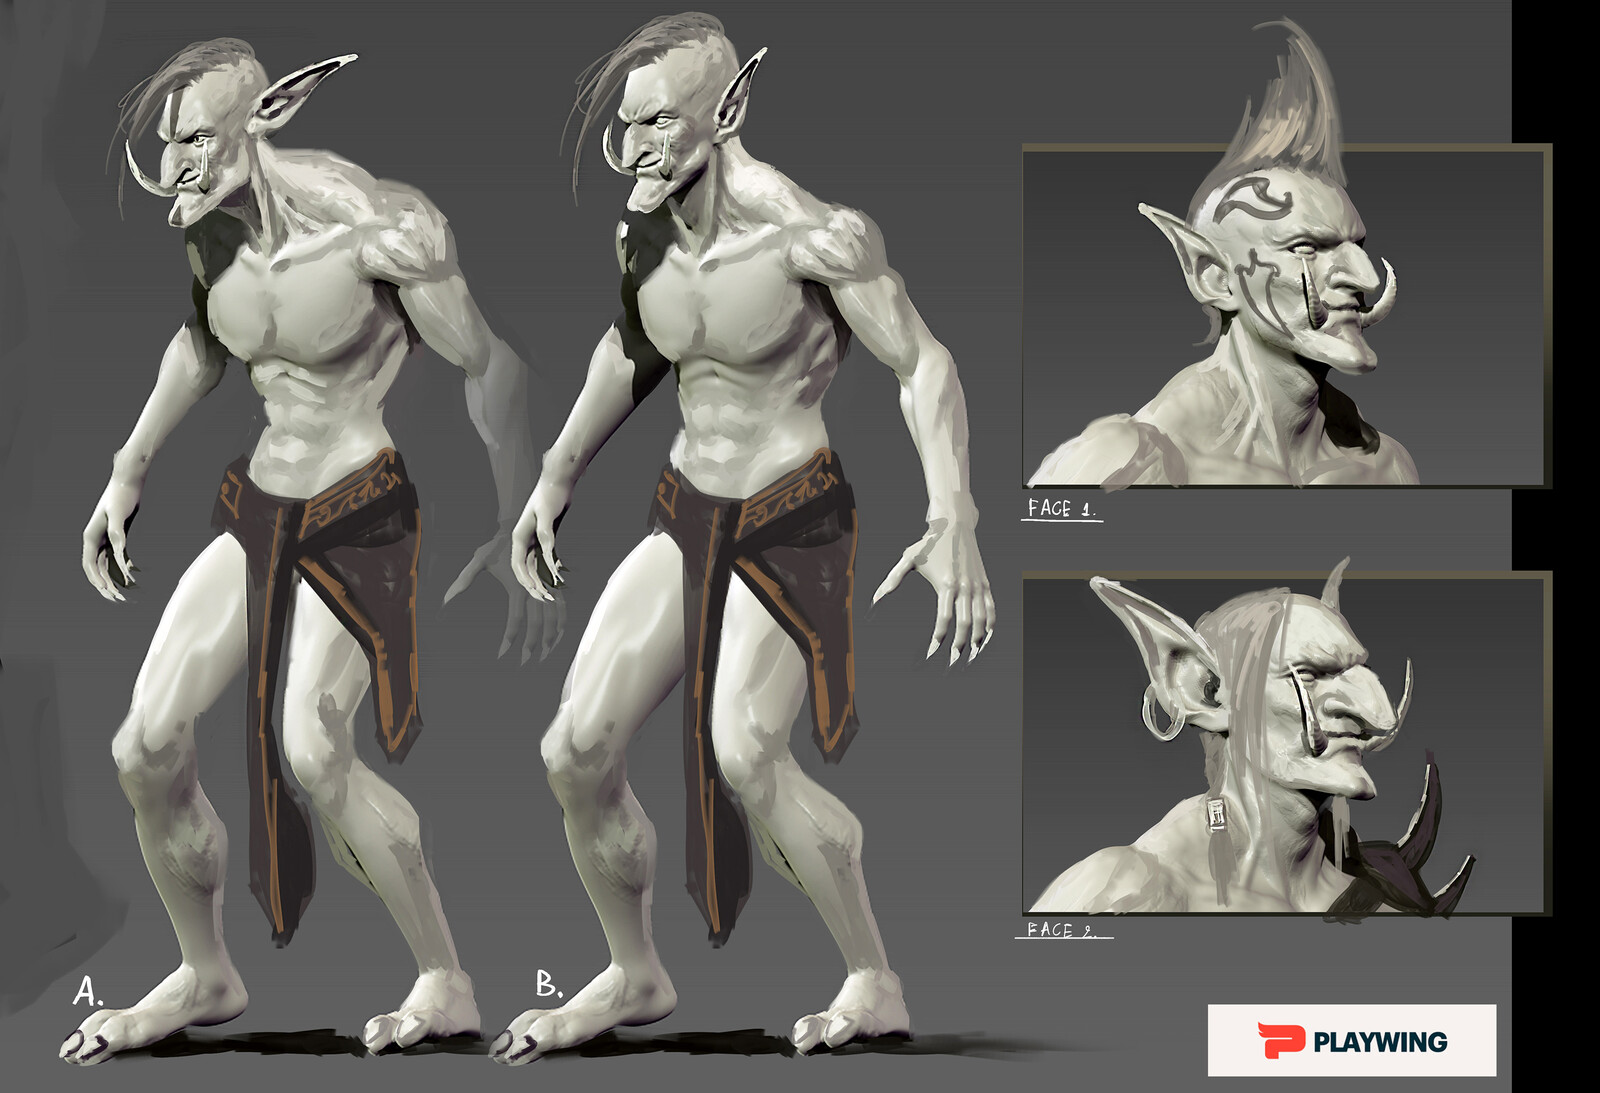 Trolls Concepts- Playwing